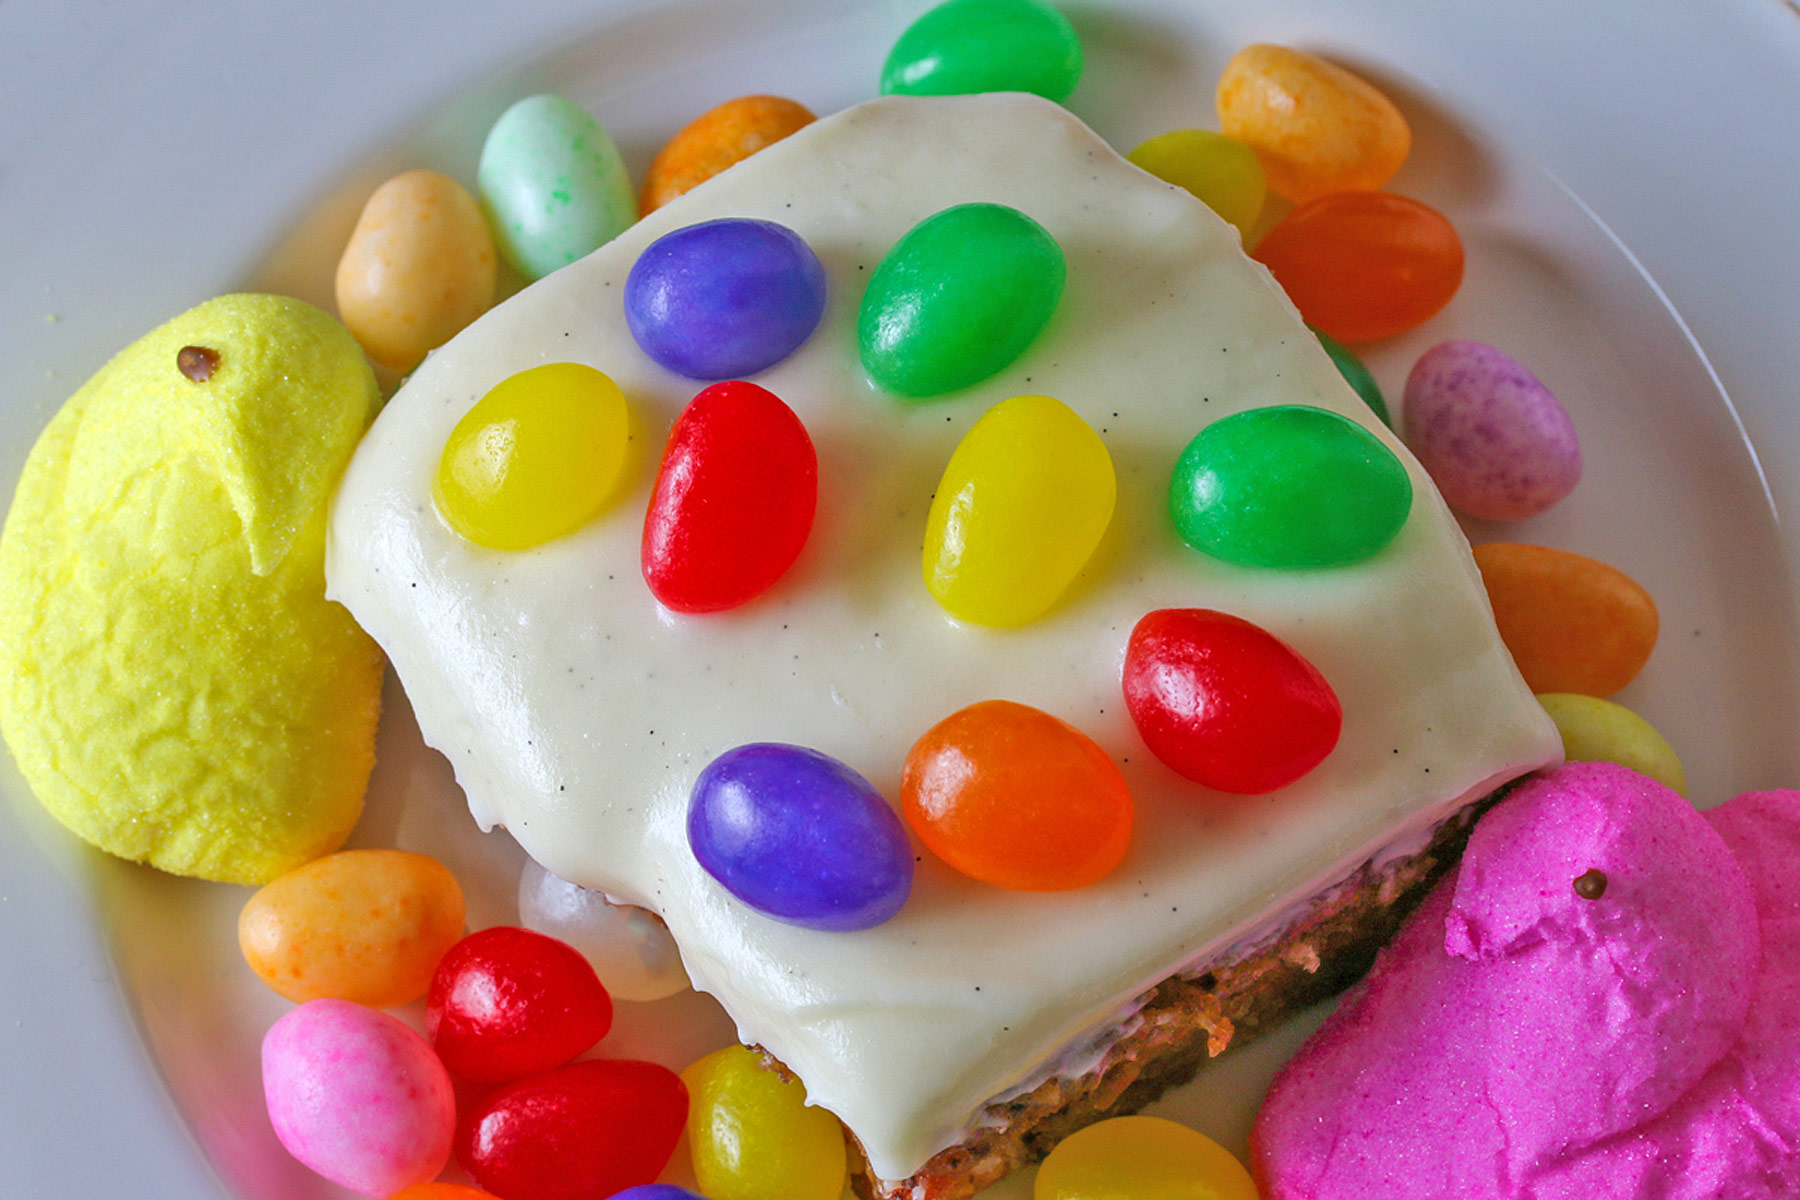 Looking straight down on top of a slice of the cake with colorful jelly beans on top. 